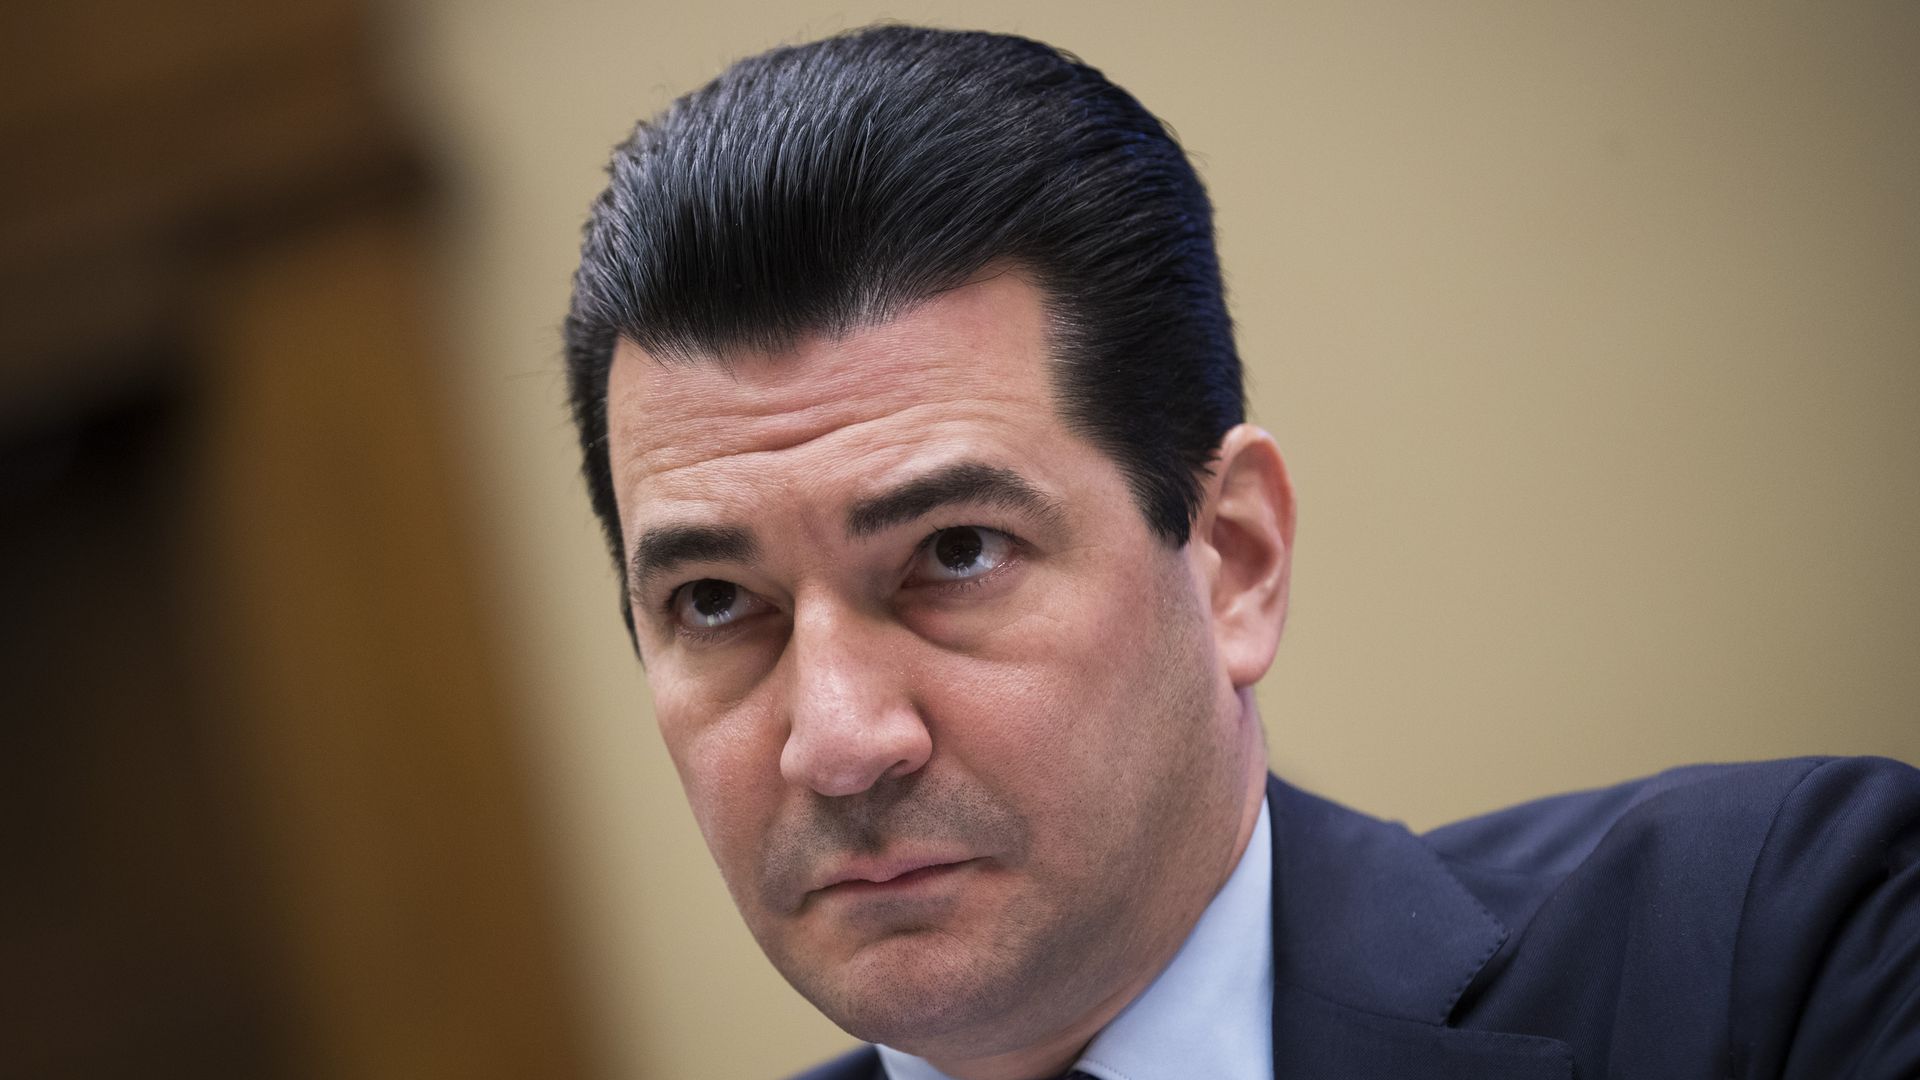 In this image, Scott Gottlieb looks ahead with a slightly concerned expression. 